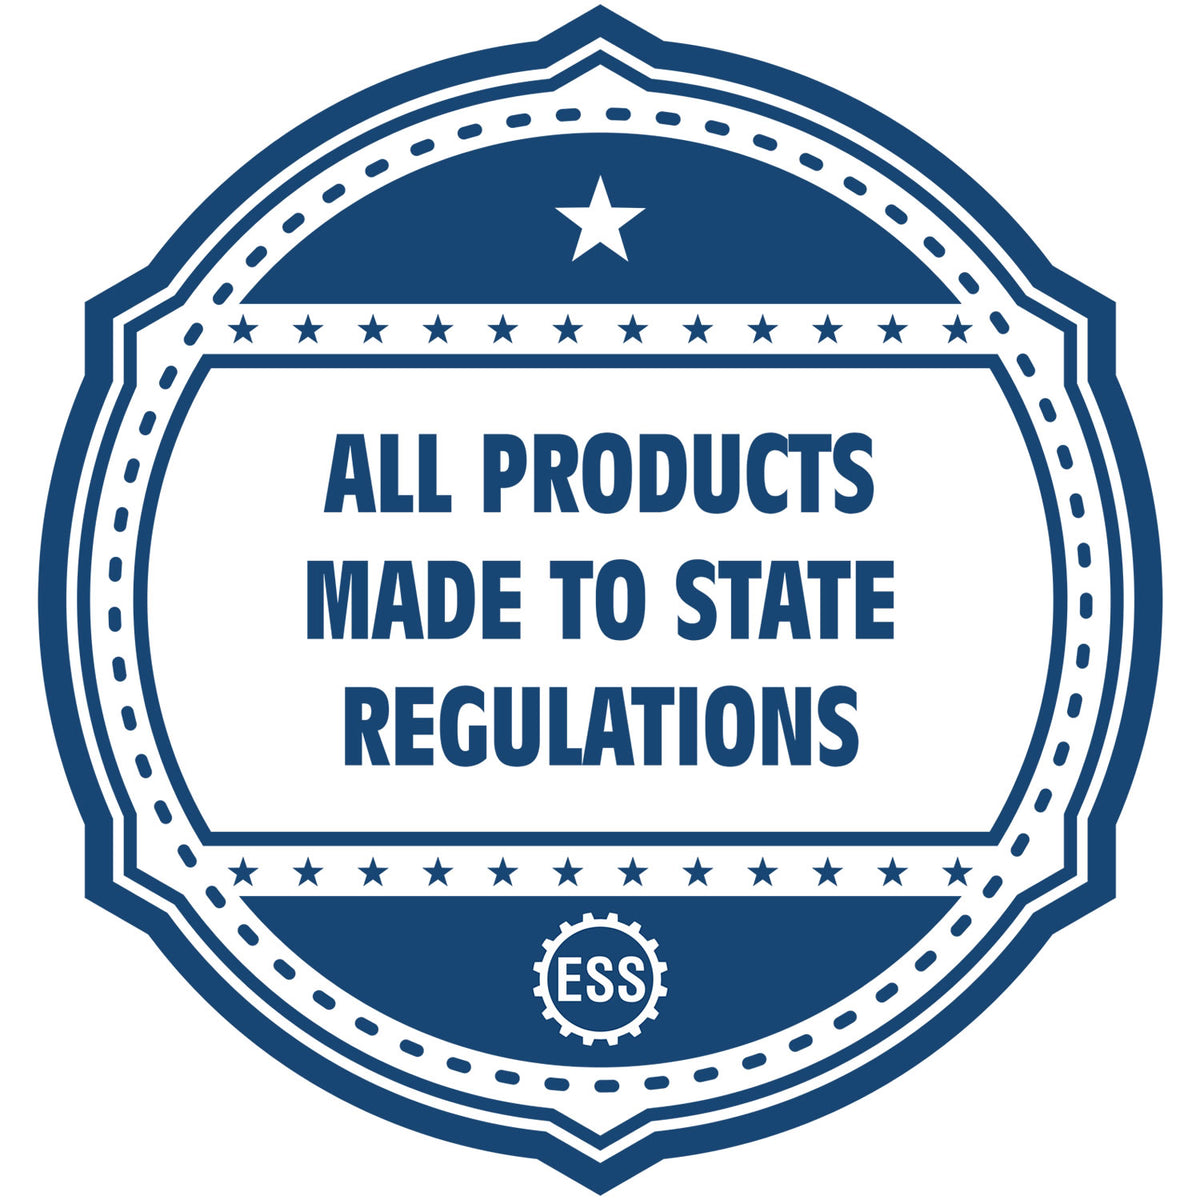 An icon or badge element for the Heavy Duty Cast Iron Nevada Engineer Seal Embosser showing that this product is made in compliance with state regulations.